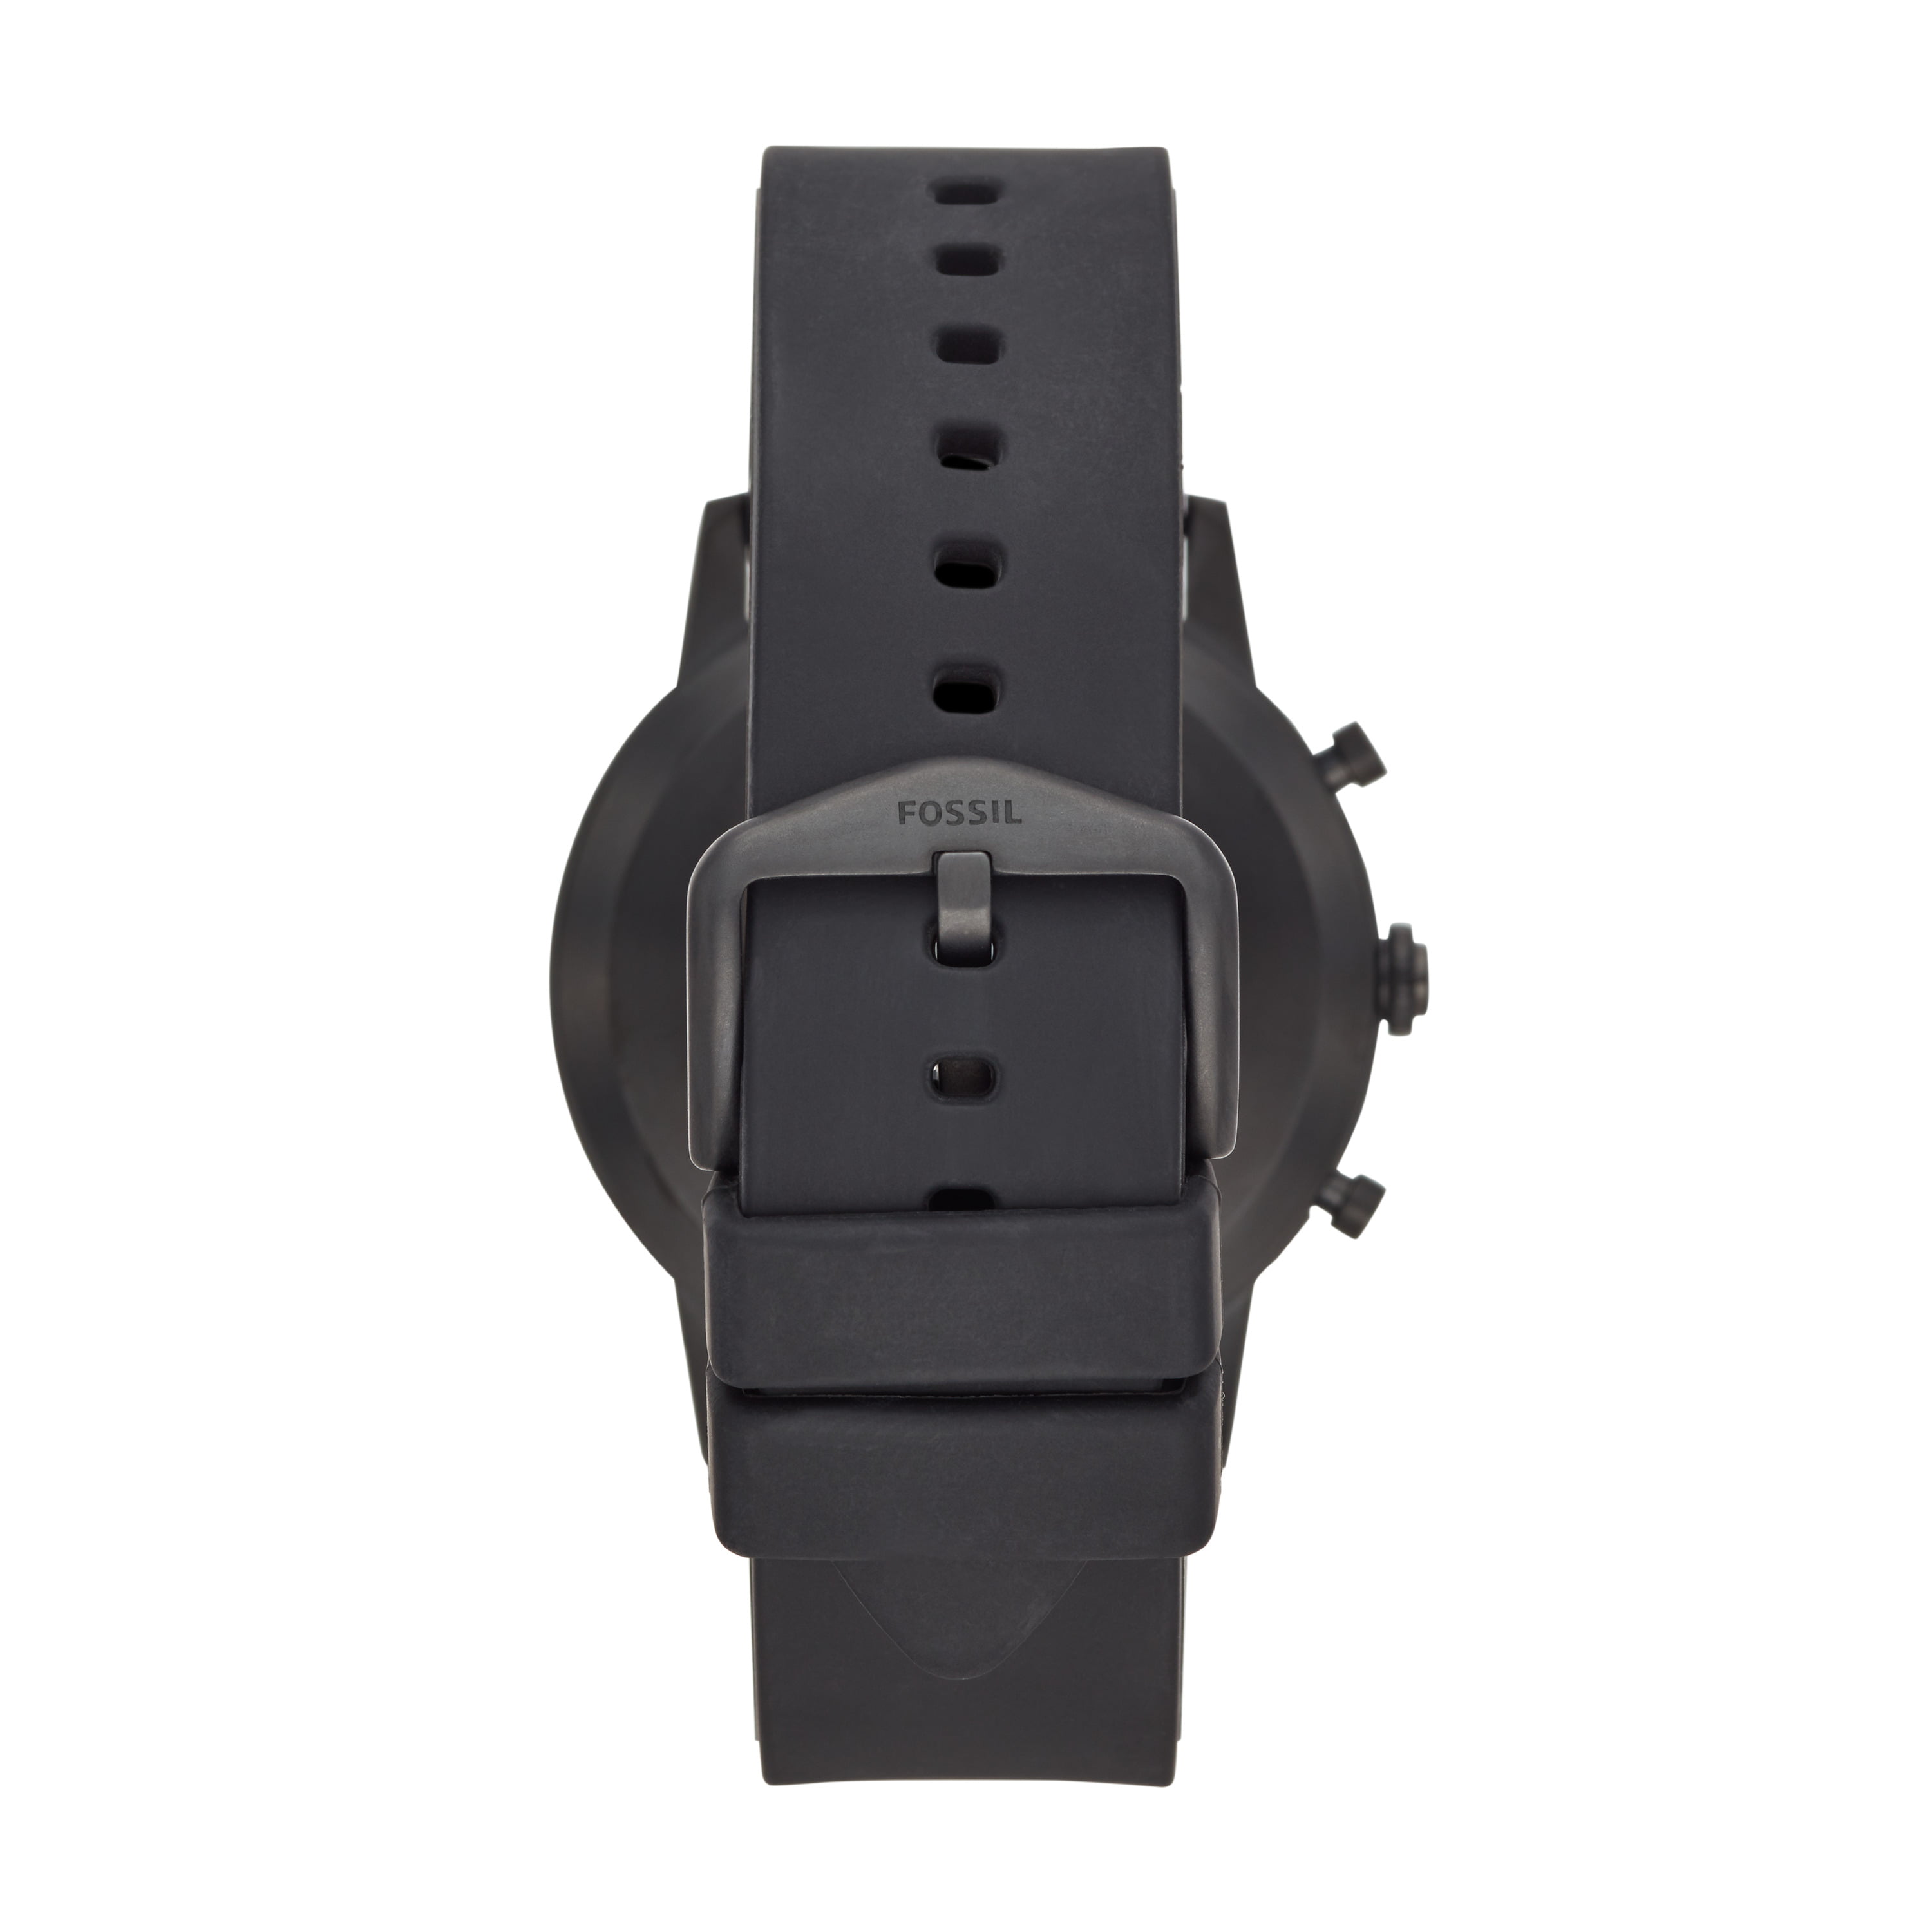 Fossil Men's Collider Hybrid Smartwatch HR Black-Tone Stainless Steel with Black Silicone Band, - Walmart.com